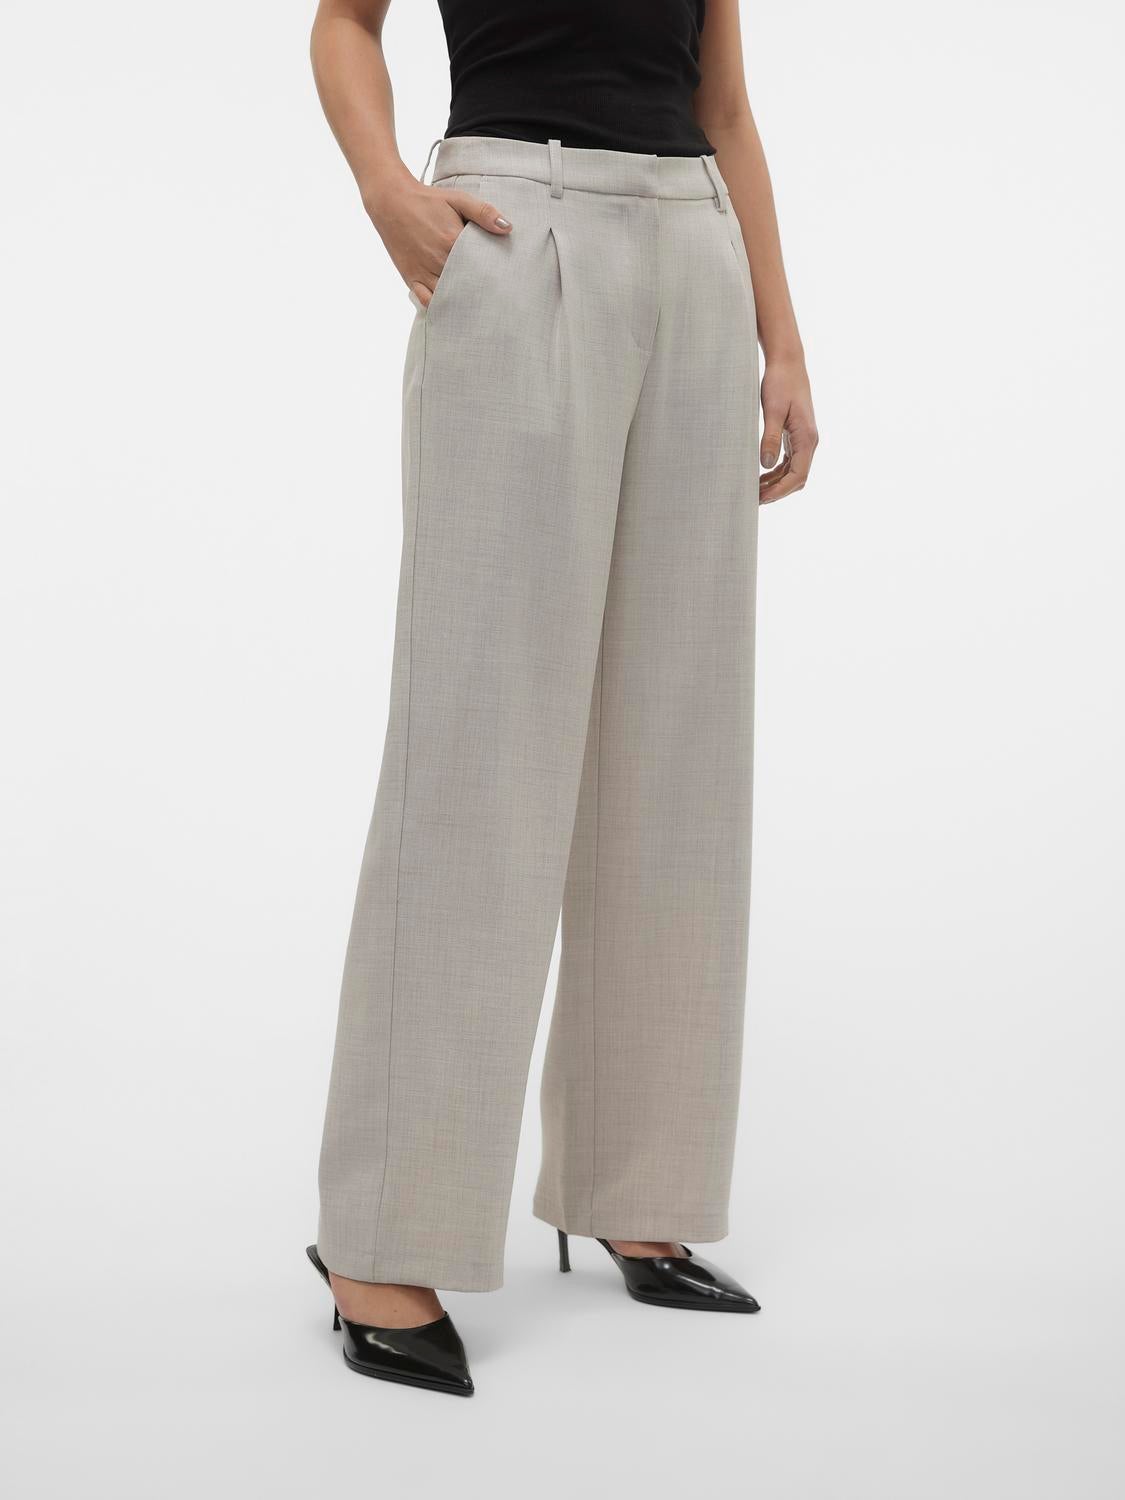 Perfect Pants For Girls With Short Legs